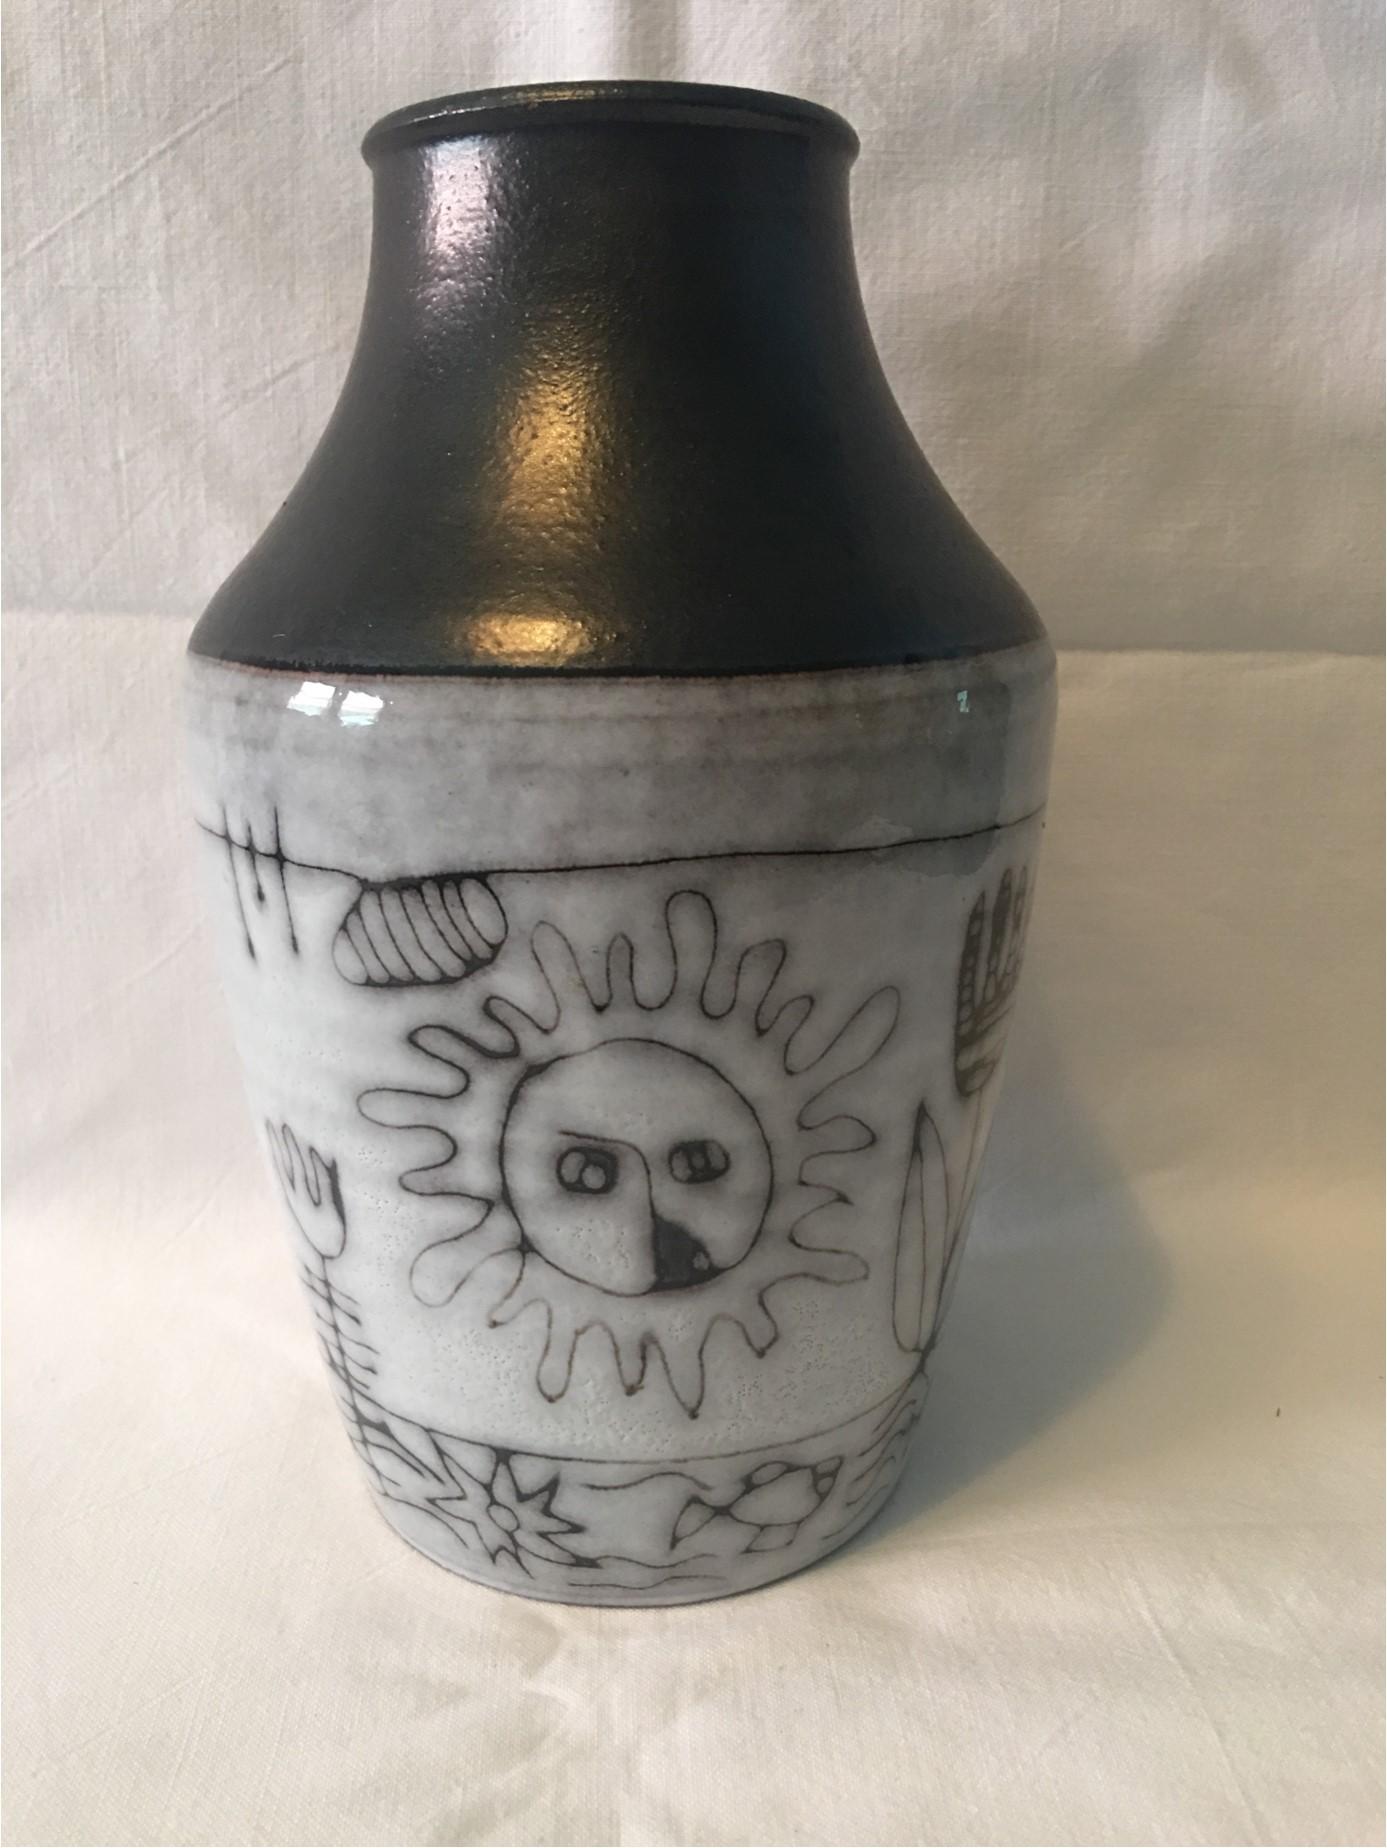 A very nice Ceramic Vase by Wilhelm and Elly Kuch of Burgthann , Germany. They are known for their beautiful and unique forms and glazes.
Wilhelm Kuch, born 1925 ,1947 apprenticeship - Gusso Reuss in Munich - 1948 opened the studio in Burgthann -